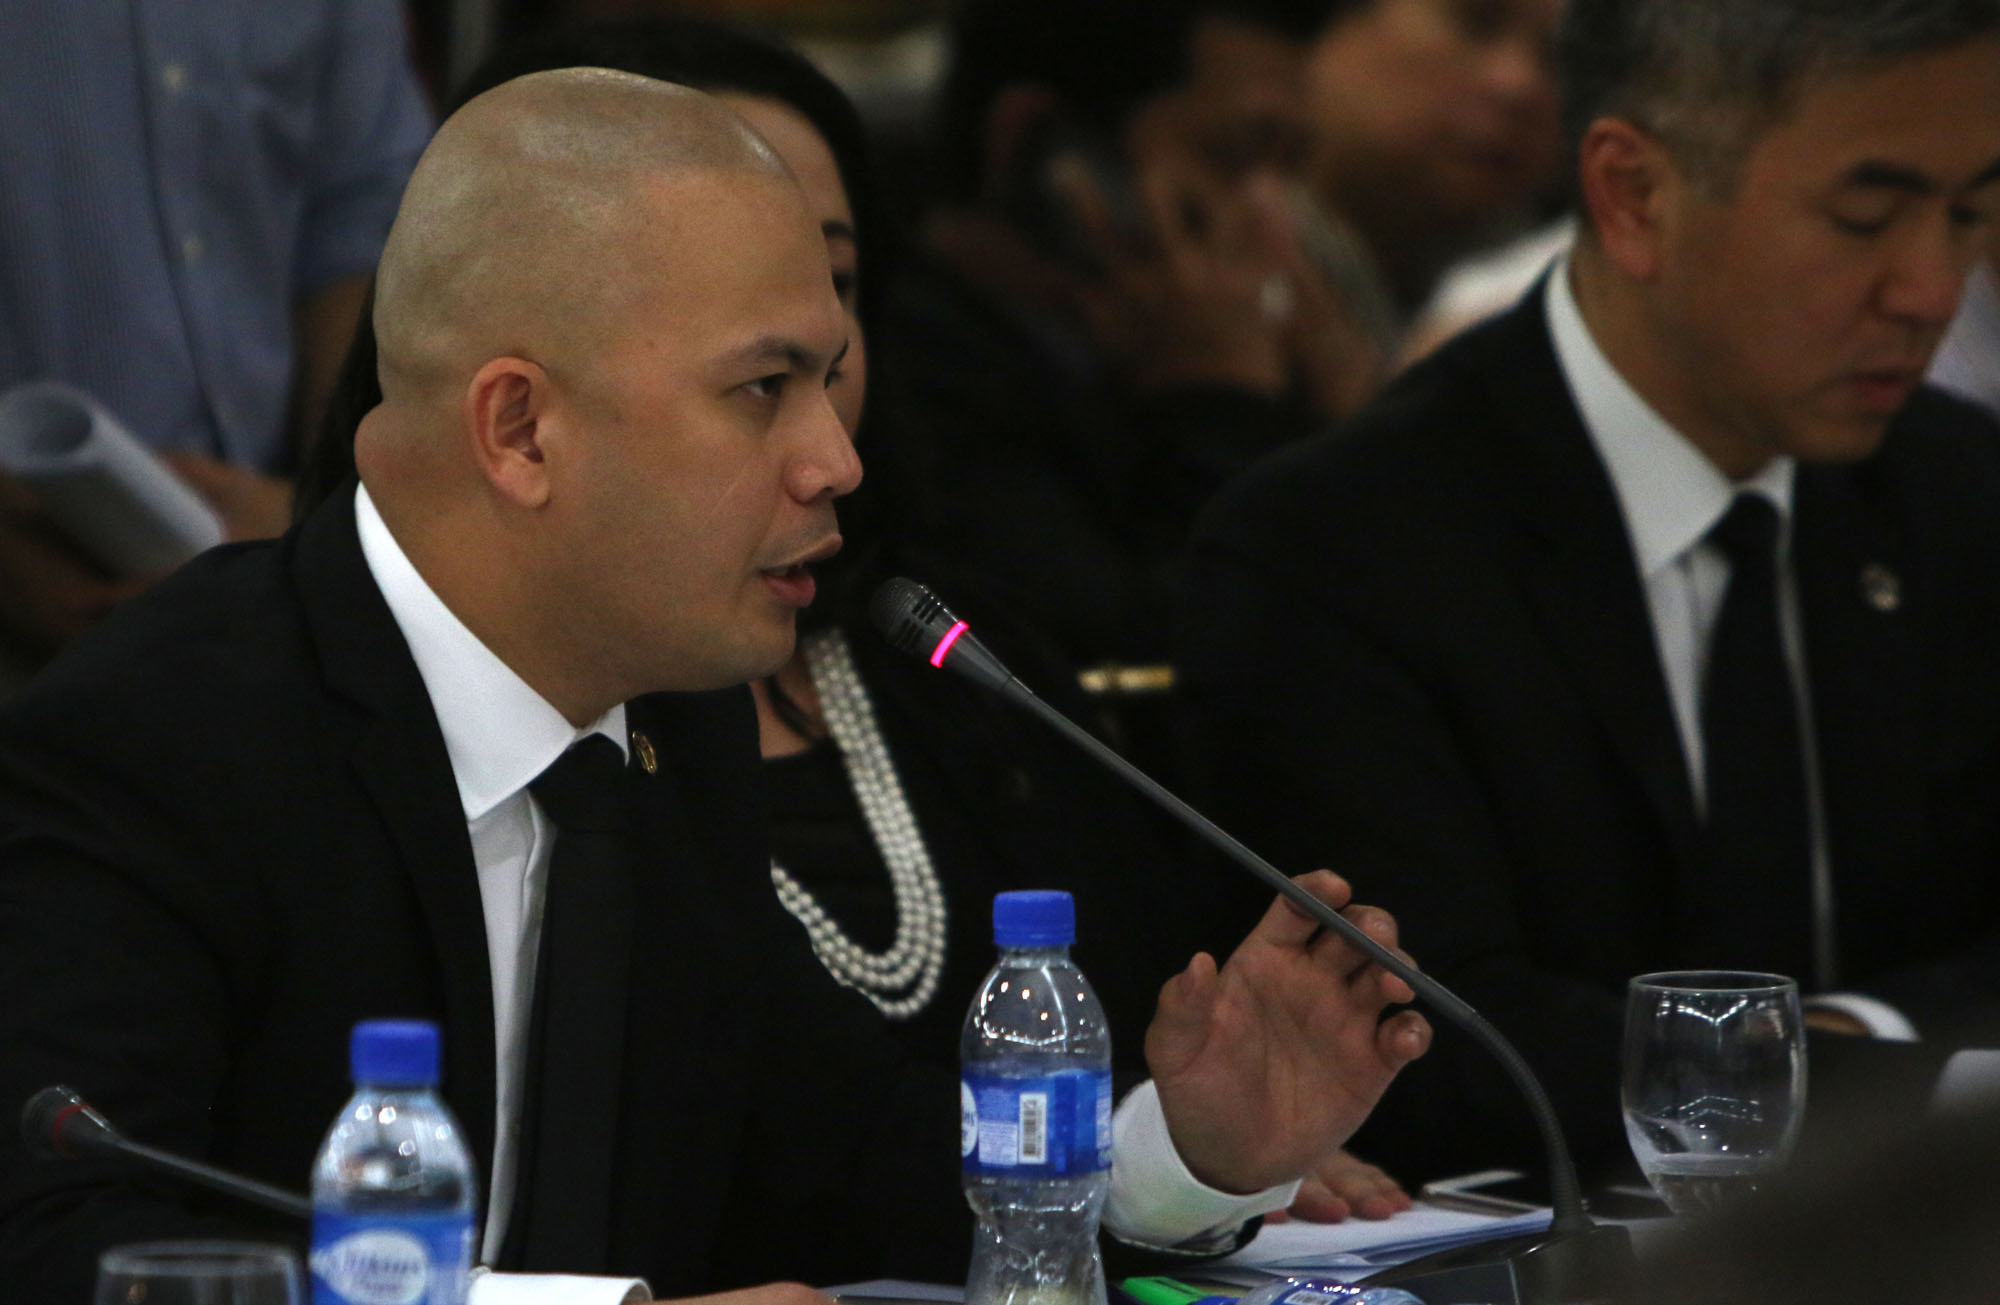 UNDER SCRUTINY. Resorts World Manila Safety, Security and Surveillance office chief Armeen Gomez during the congressional committee hearing on the Resorts World Manila incident at the Dignitaries Lounge of NAIA Terminal 3 in Pasay City. Photo by Inoue Jaena/Rappler  